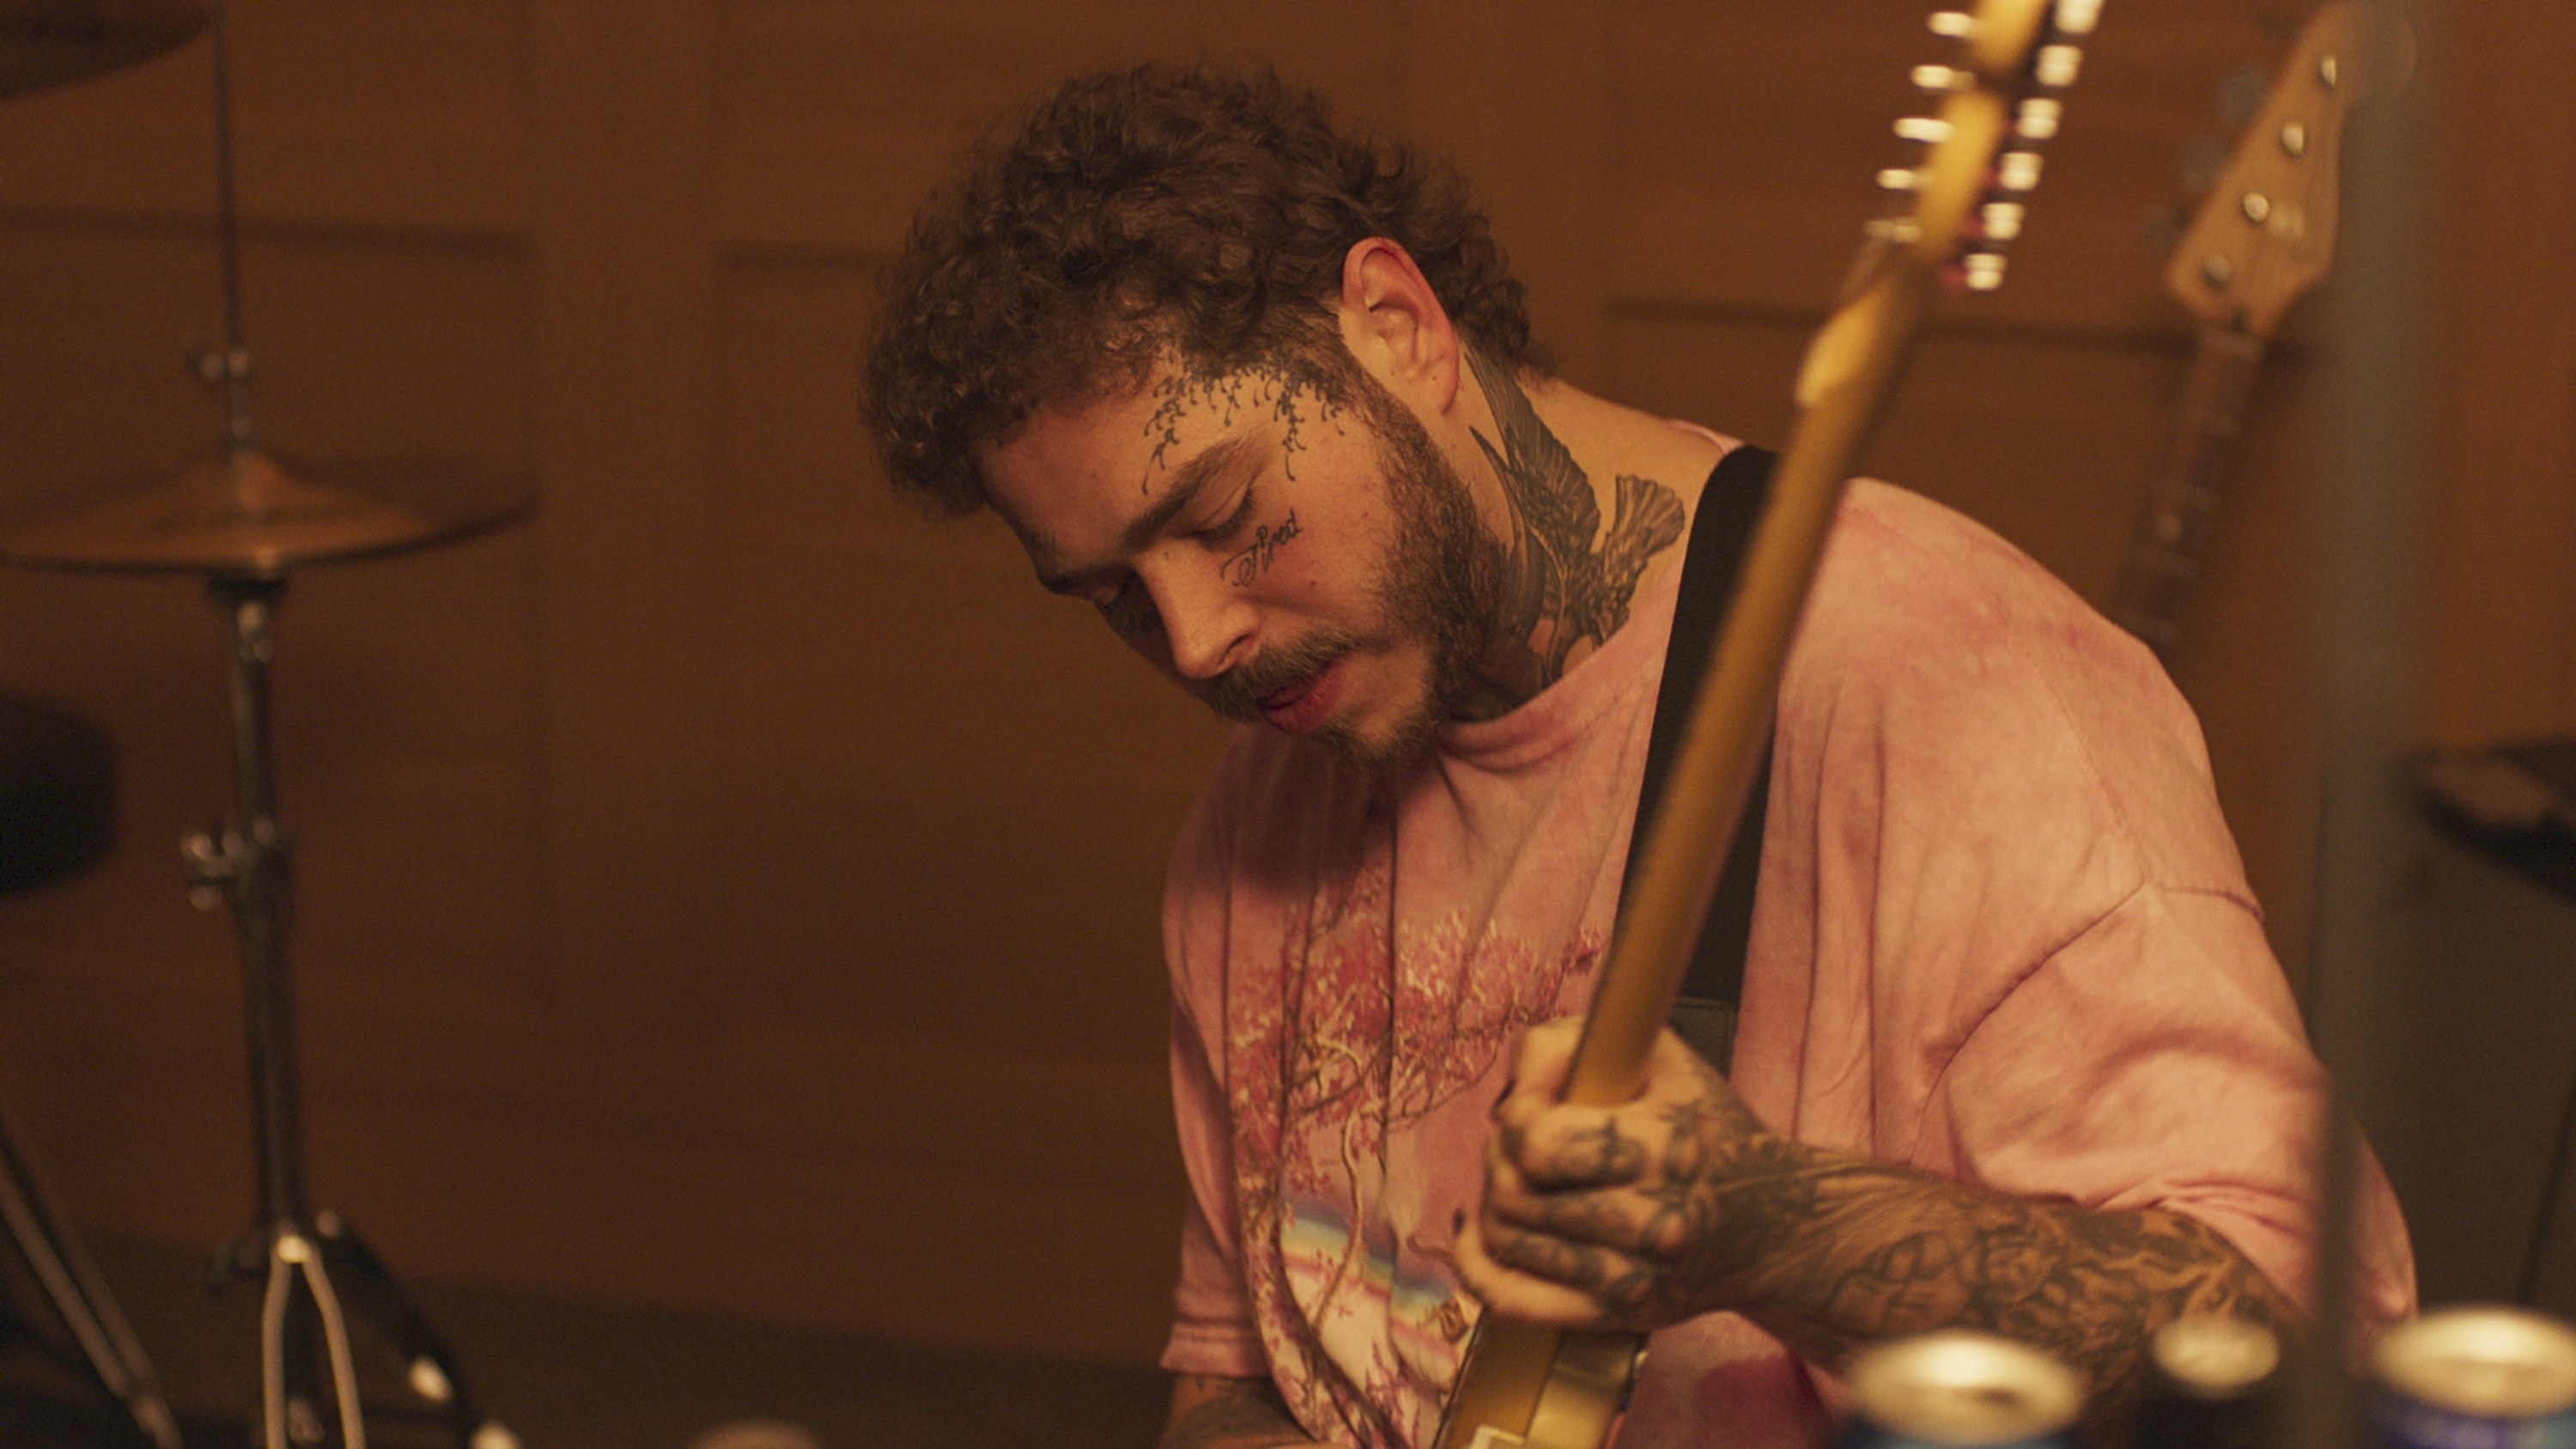 Post Malone plays the guitar